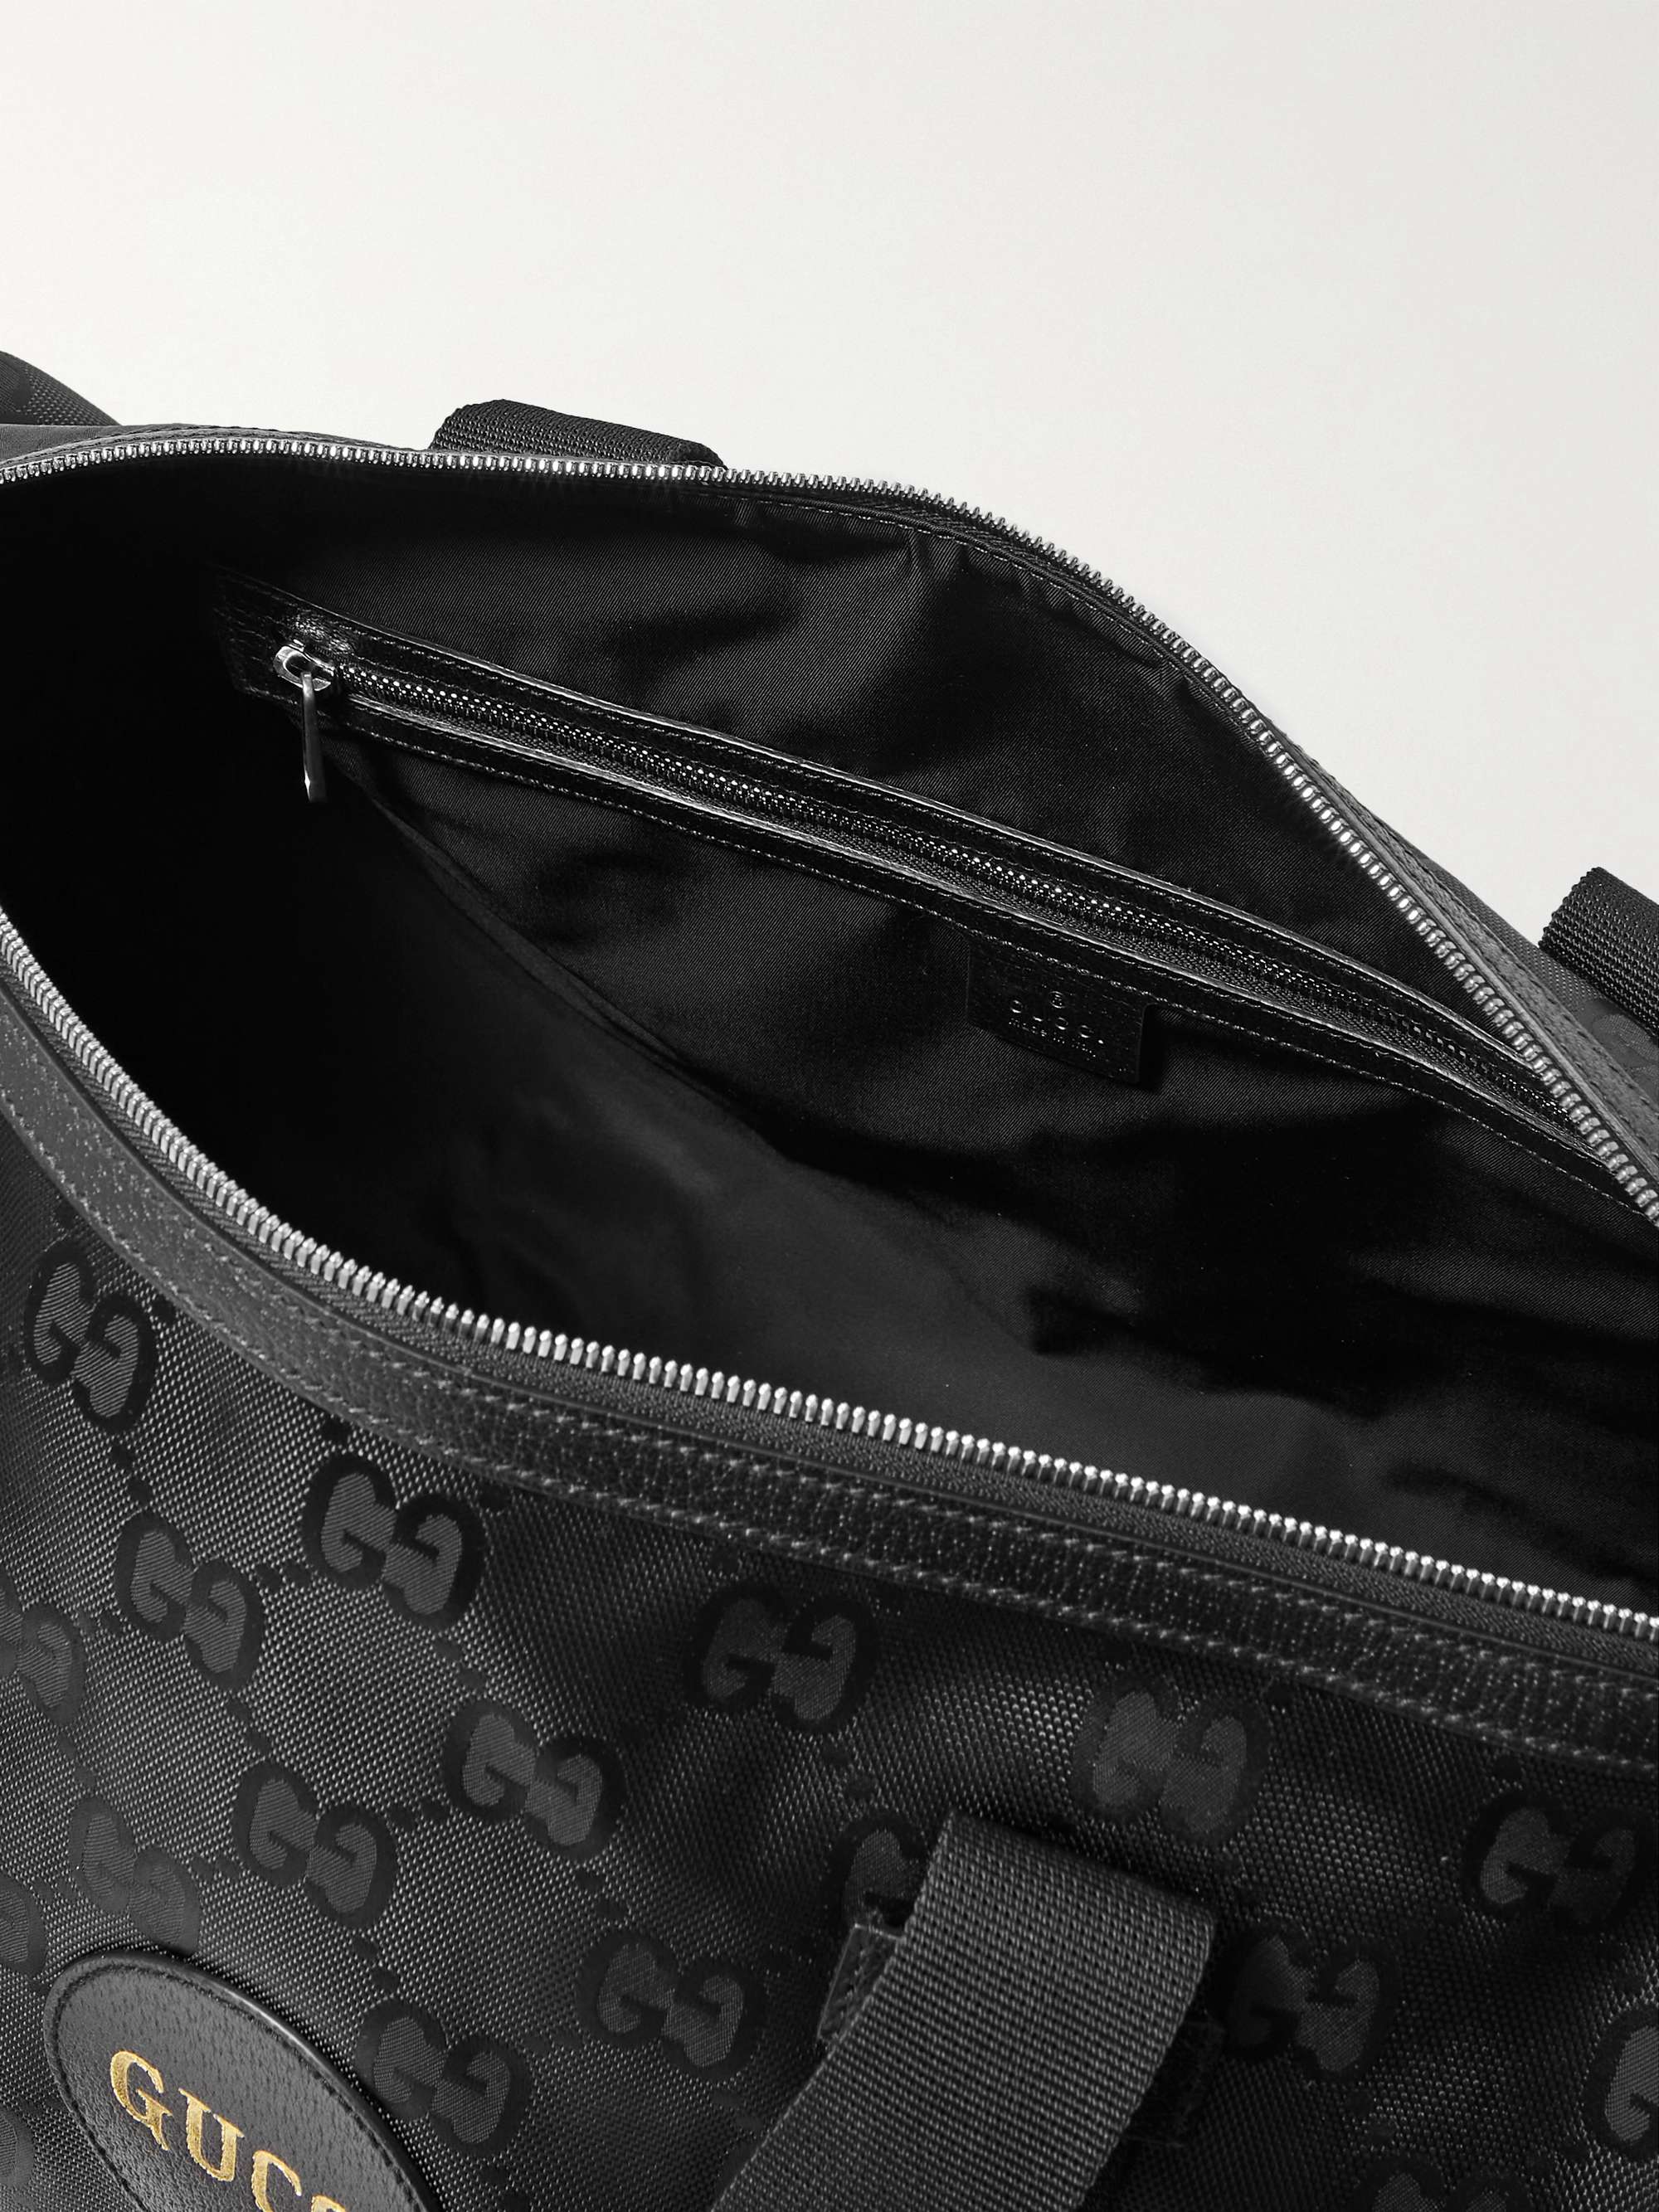 GUCCI Off the Grid Leather-Trimmed Monogrammed ECONYL Duffle Bag